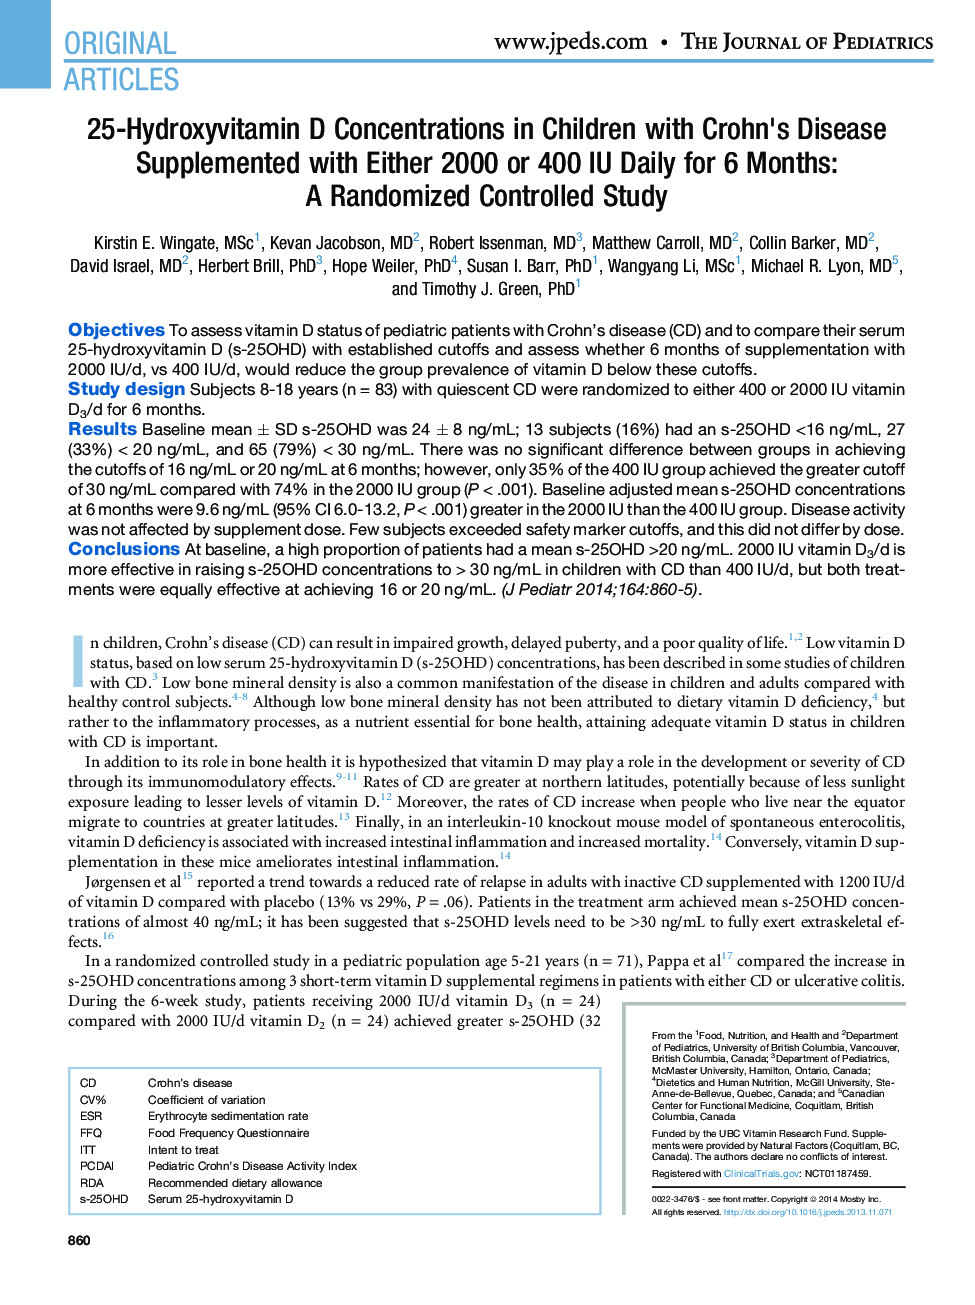 25-Hydroxyvitamin D Concentrations in Children with Crohn's Disease Supplemented with Either 2000 or 400 IU Daily for 6 Months: AÂ Randomized Controlled Study